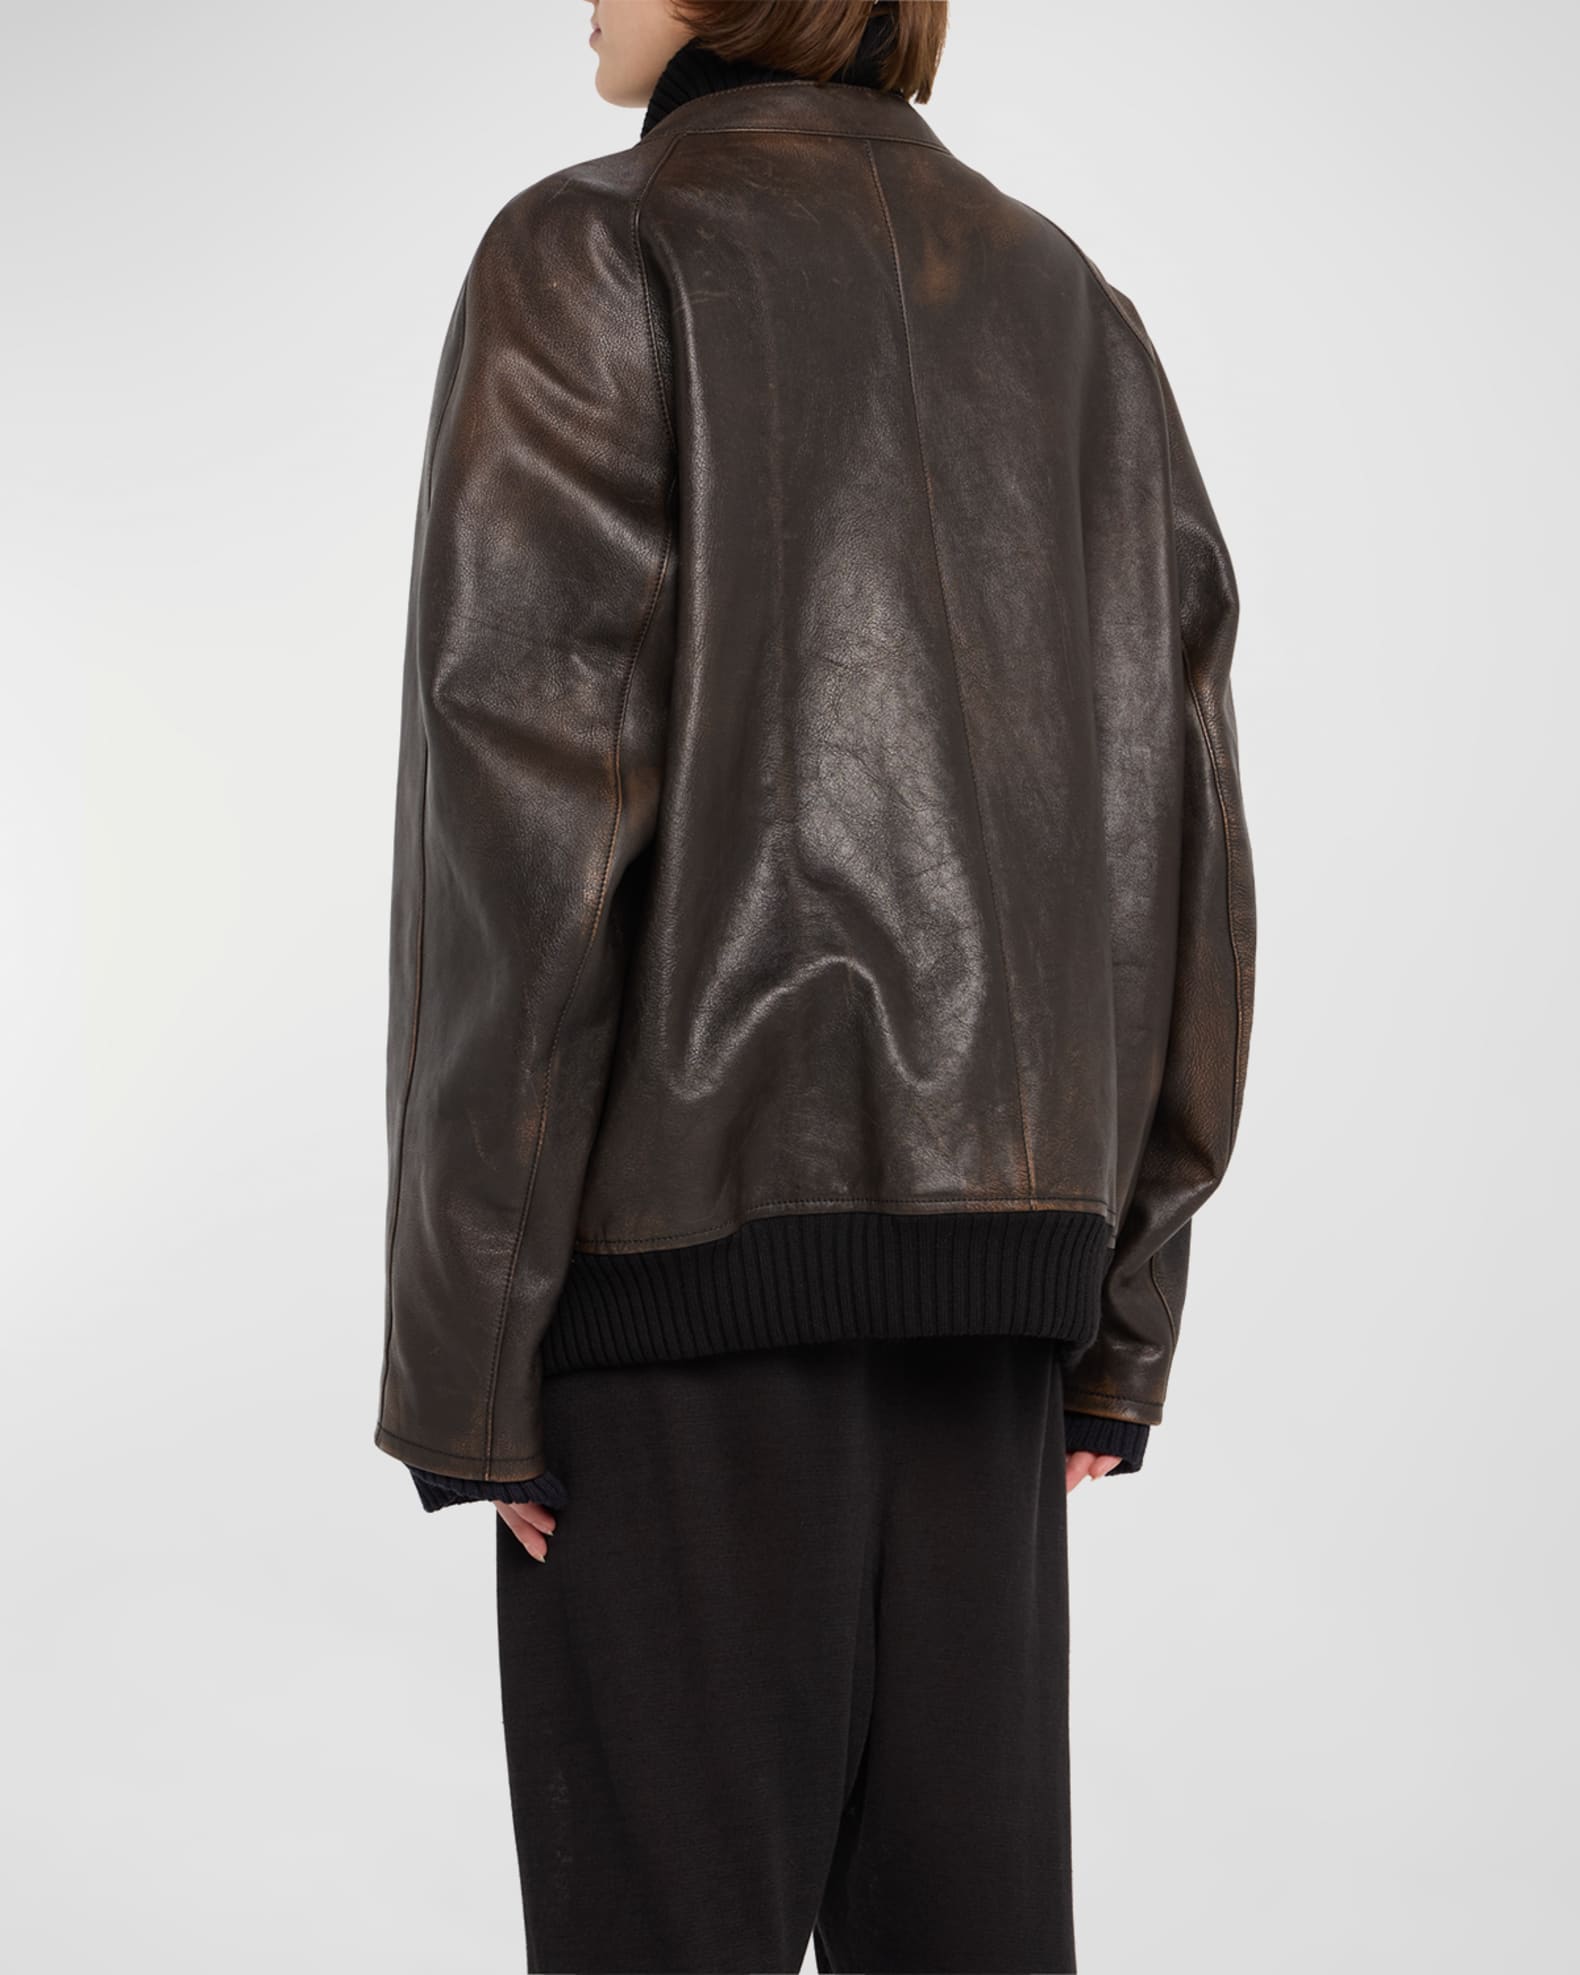 Louis Vuitton Padded Leather Bomber Jacket